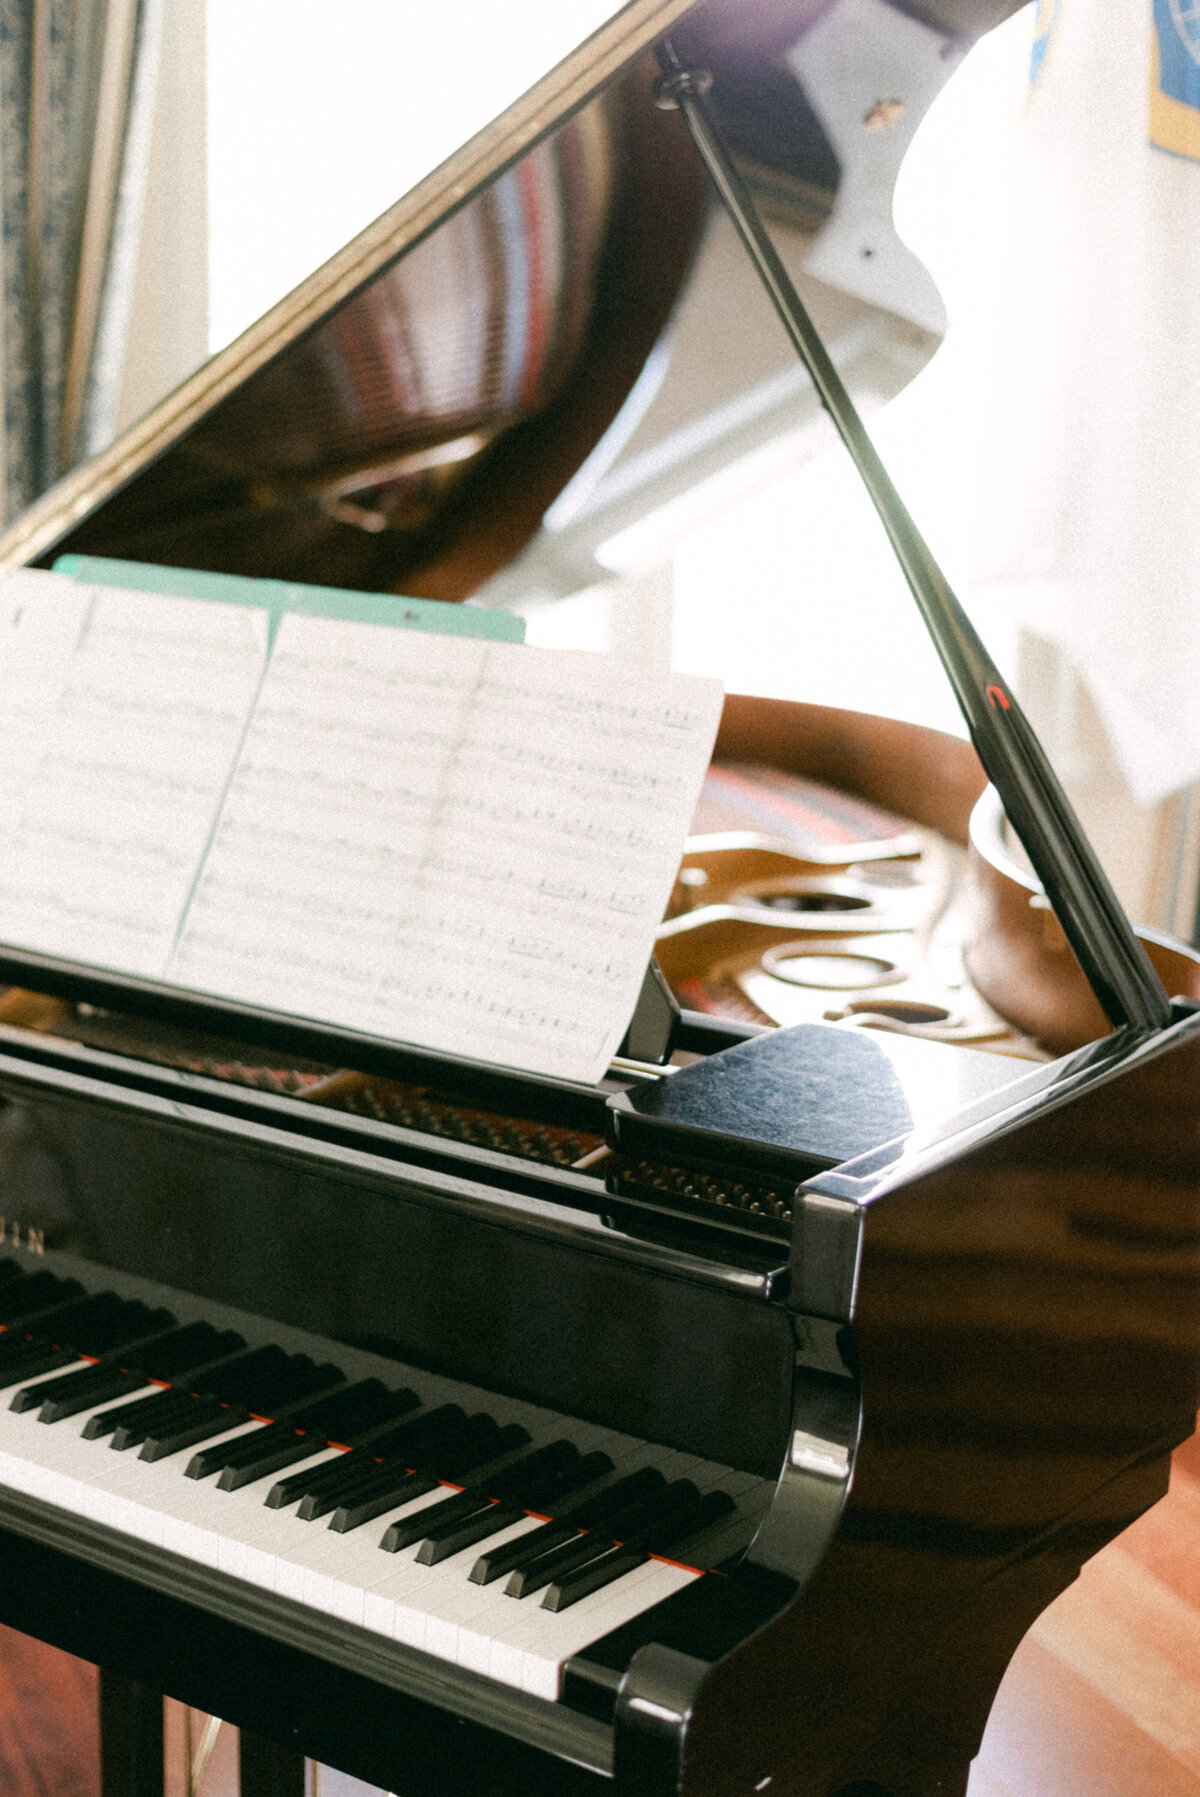 A piano photographed by wedding photographer Hannika Gabrielsson